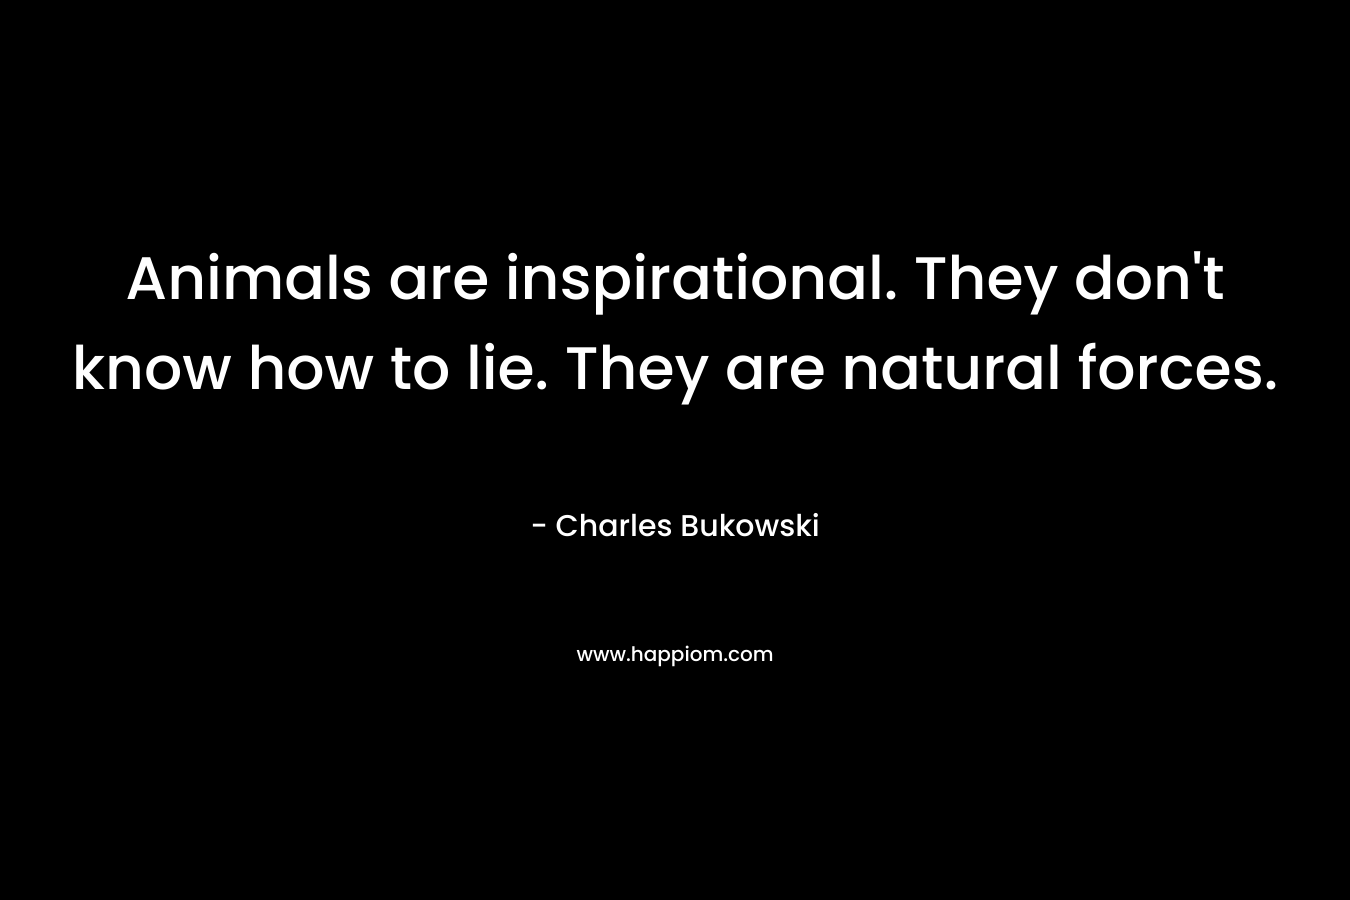 Animals are inspirational. They don’t know how to lie. They are natural forces. – Charles Bukowski